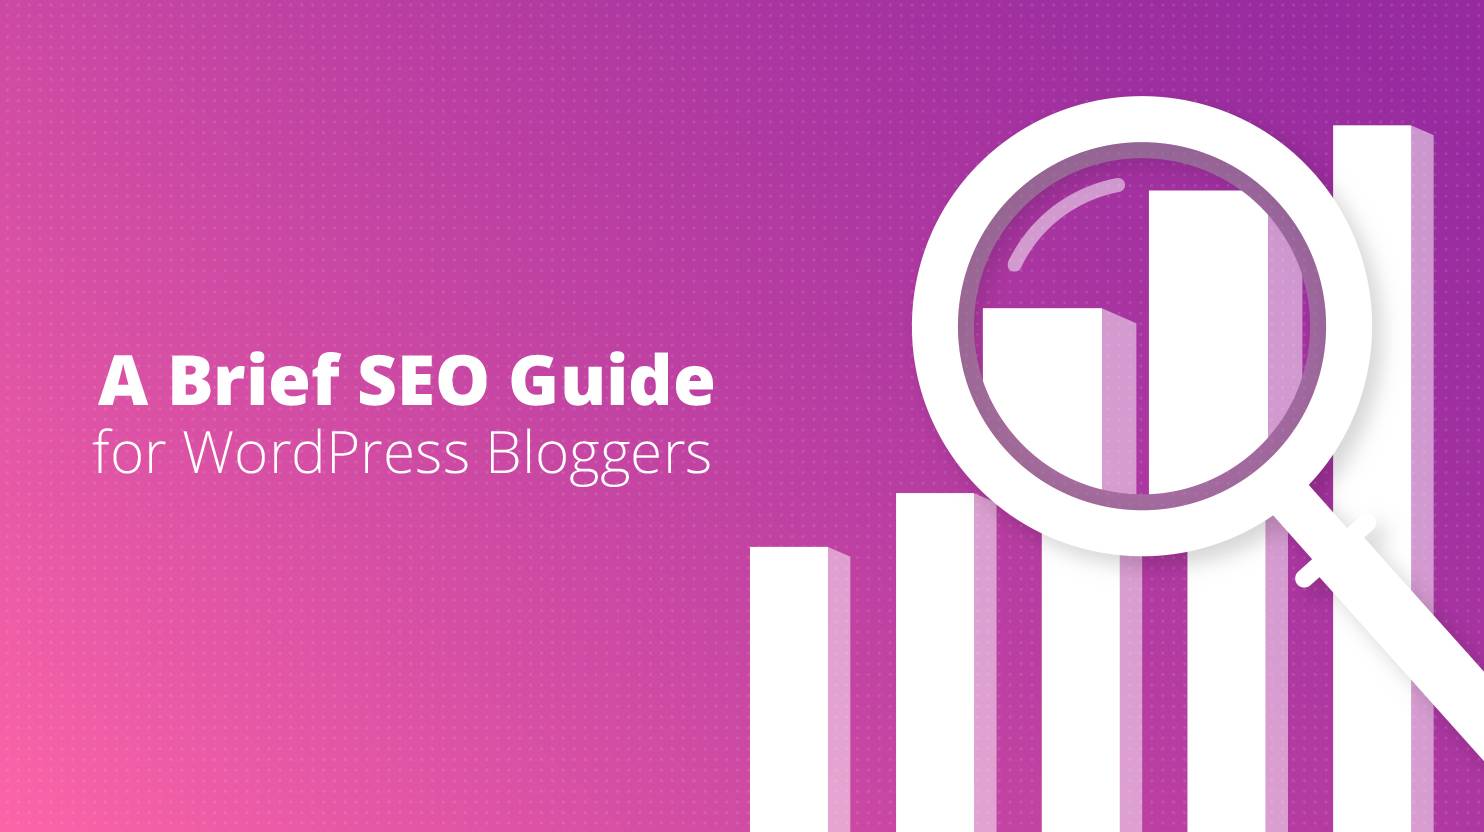 seo guide for wordpress bloggers